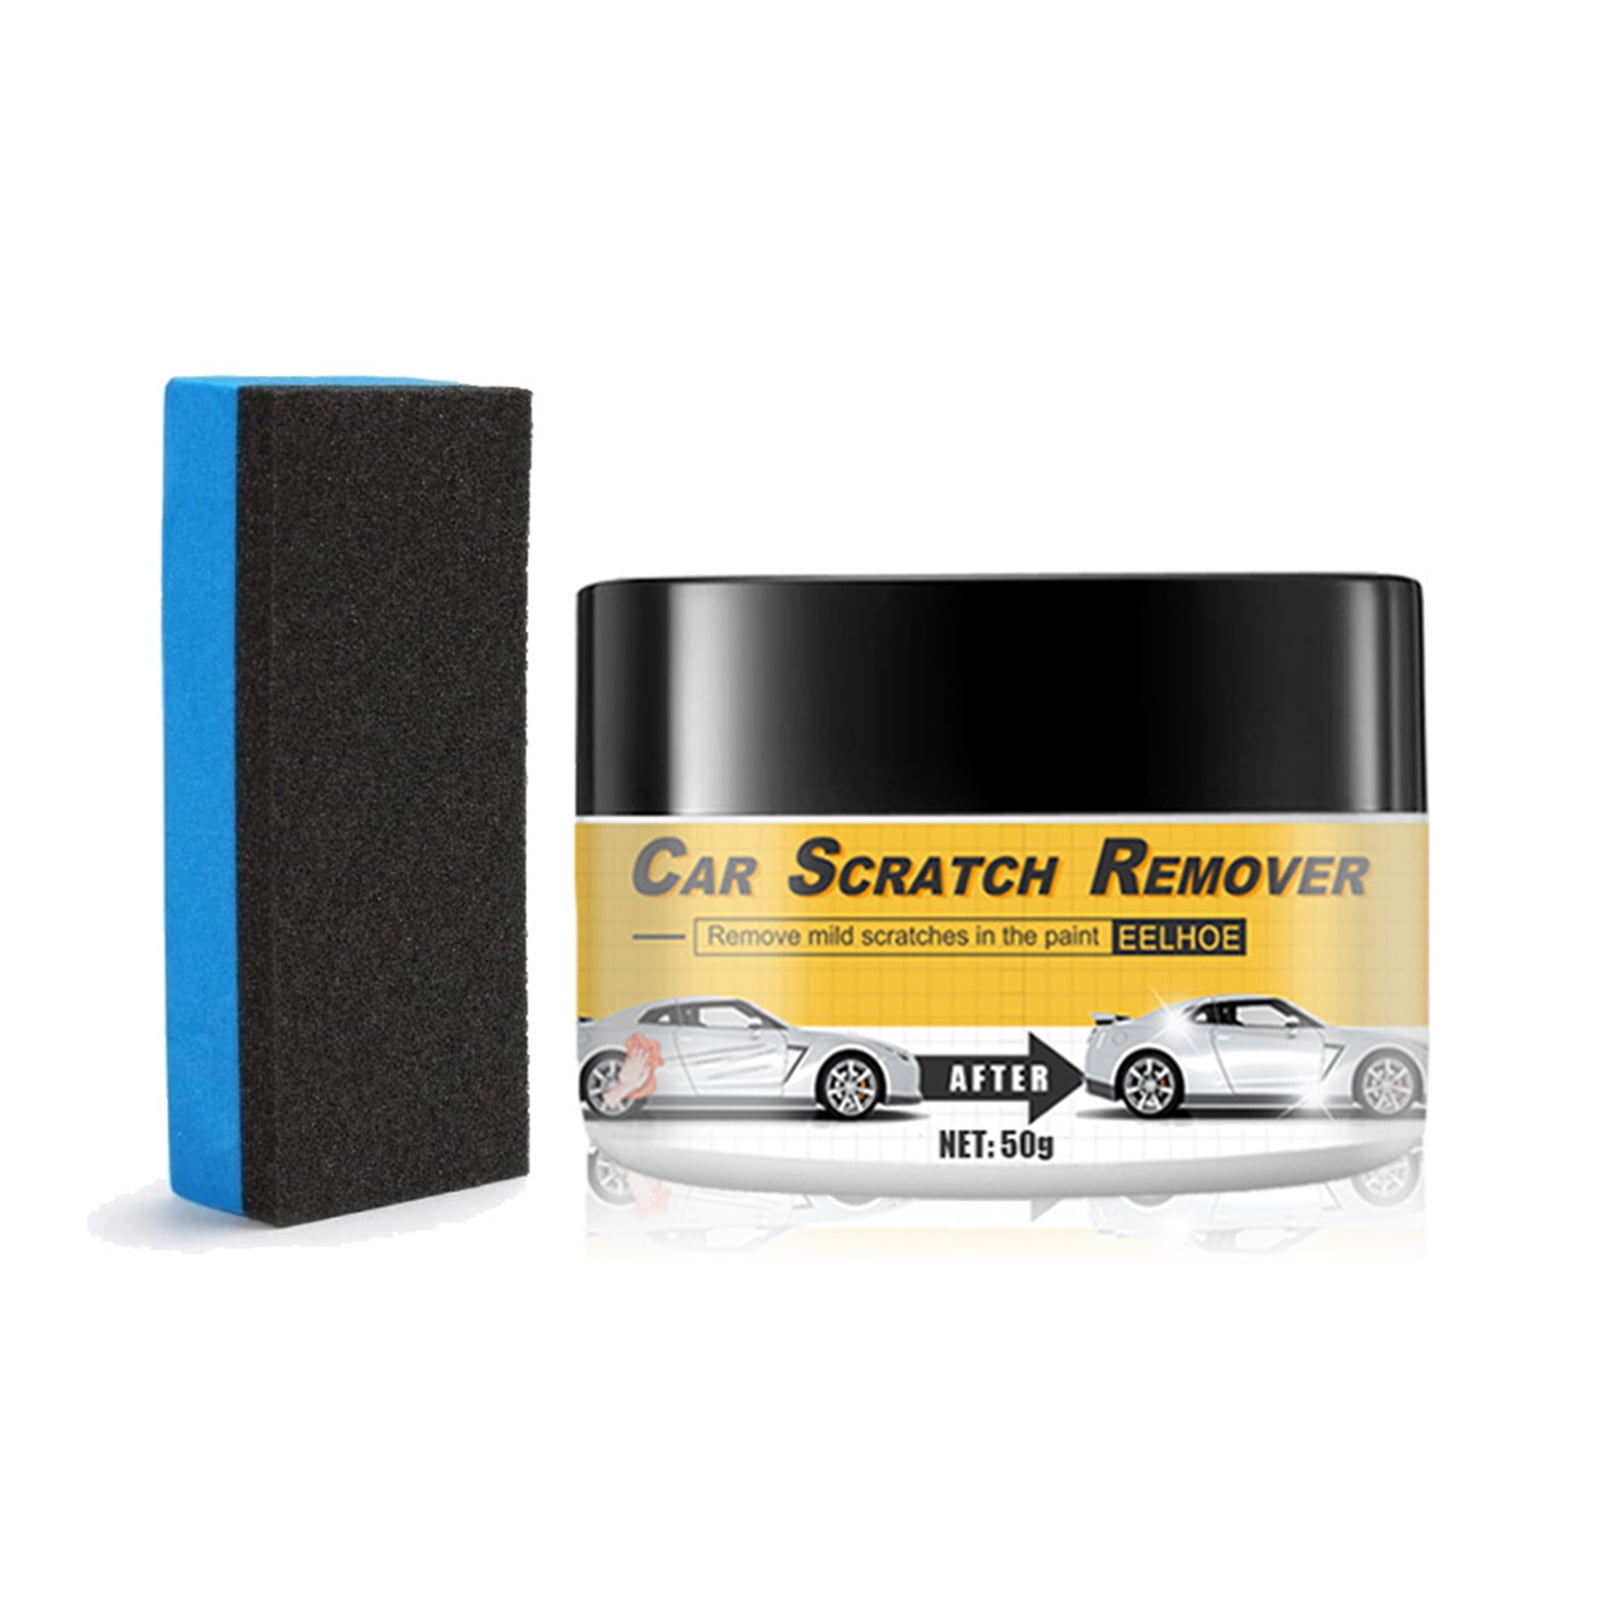 Car Scratch Remover Easy to Use Durable Save Time and Money